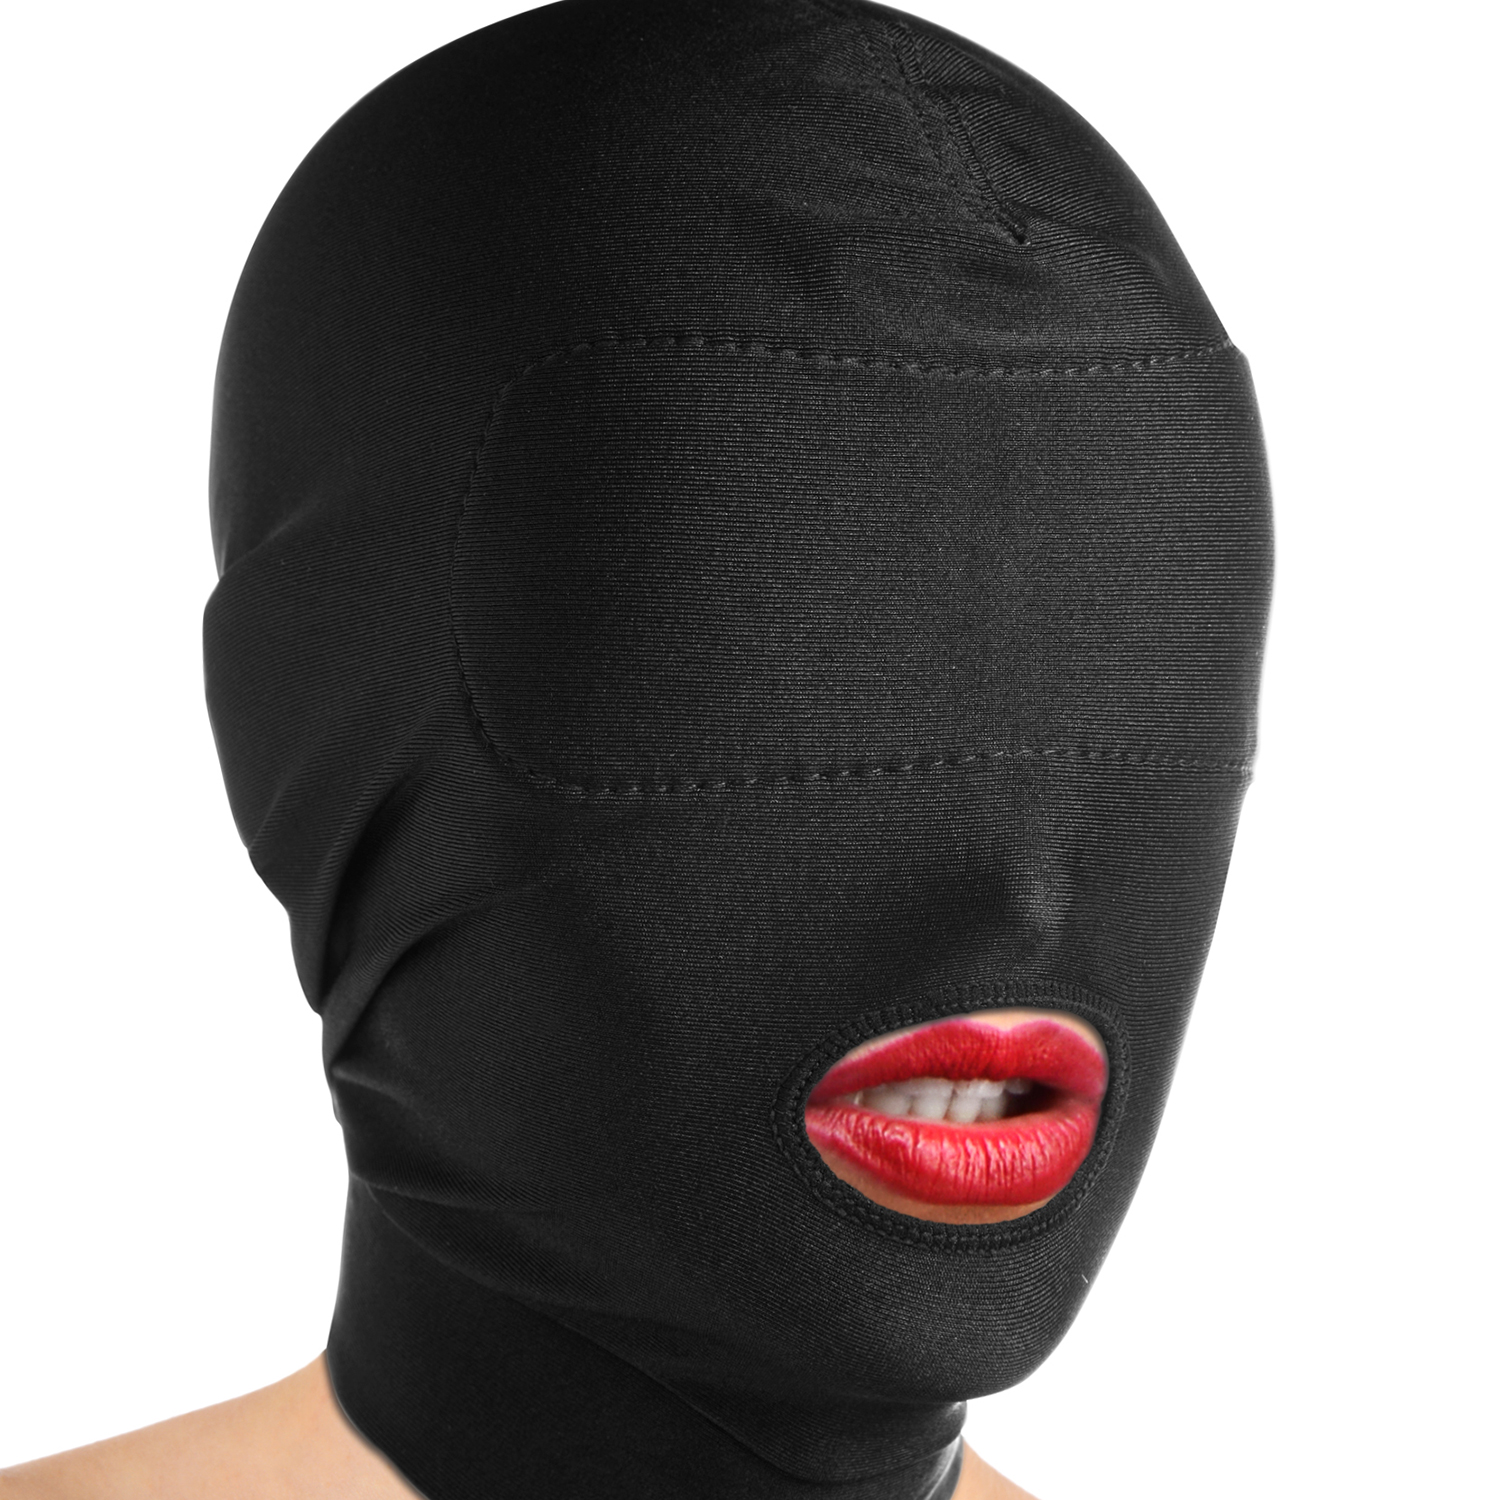 Master Series Disguise Open Mouth Maske med Blindfold - Black - One Size thumbnail